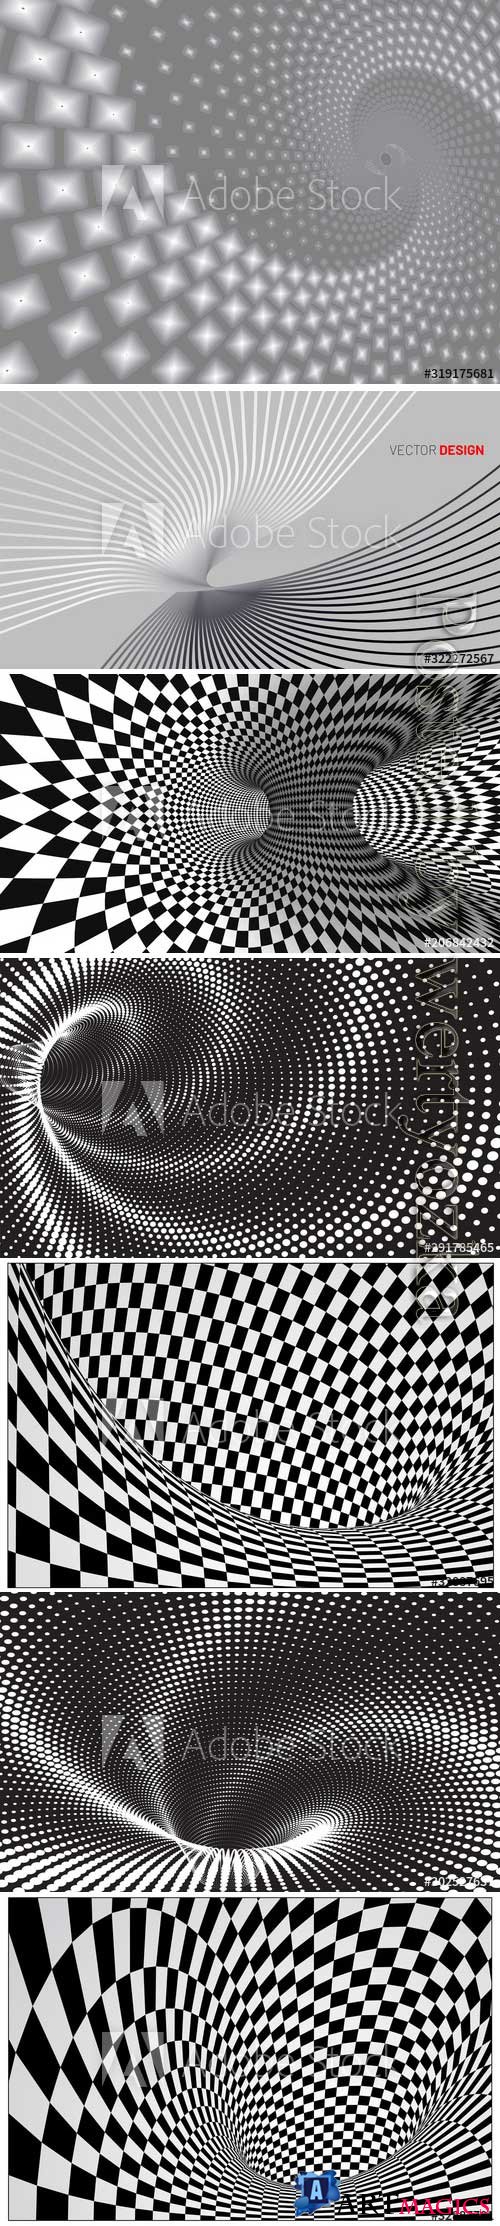 Dotted halftone vector spiral pattern, squares space view